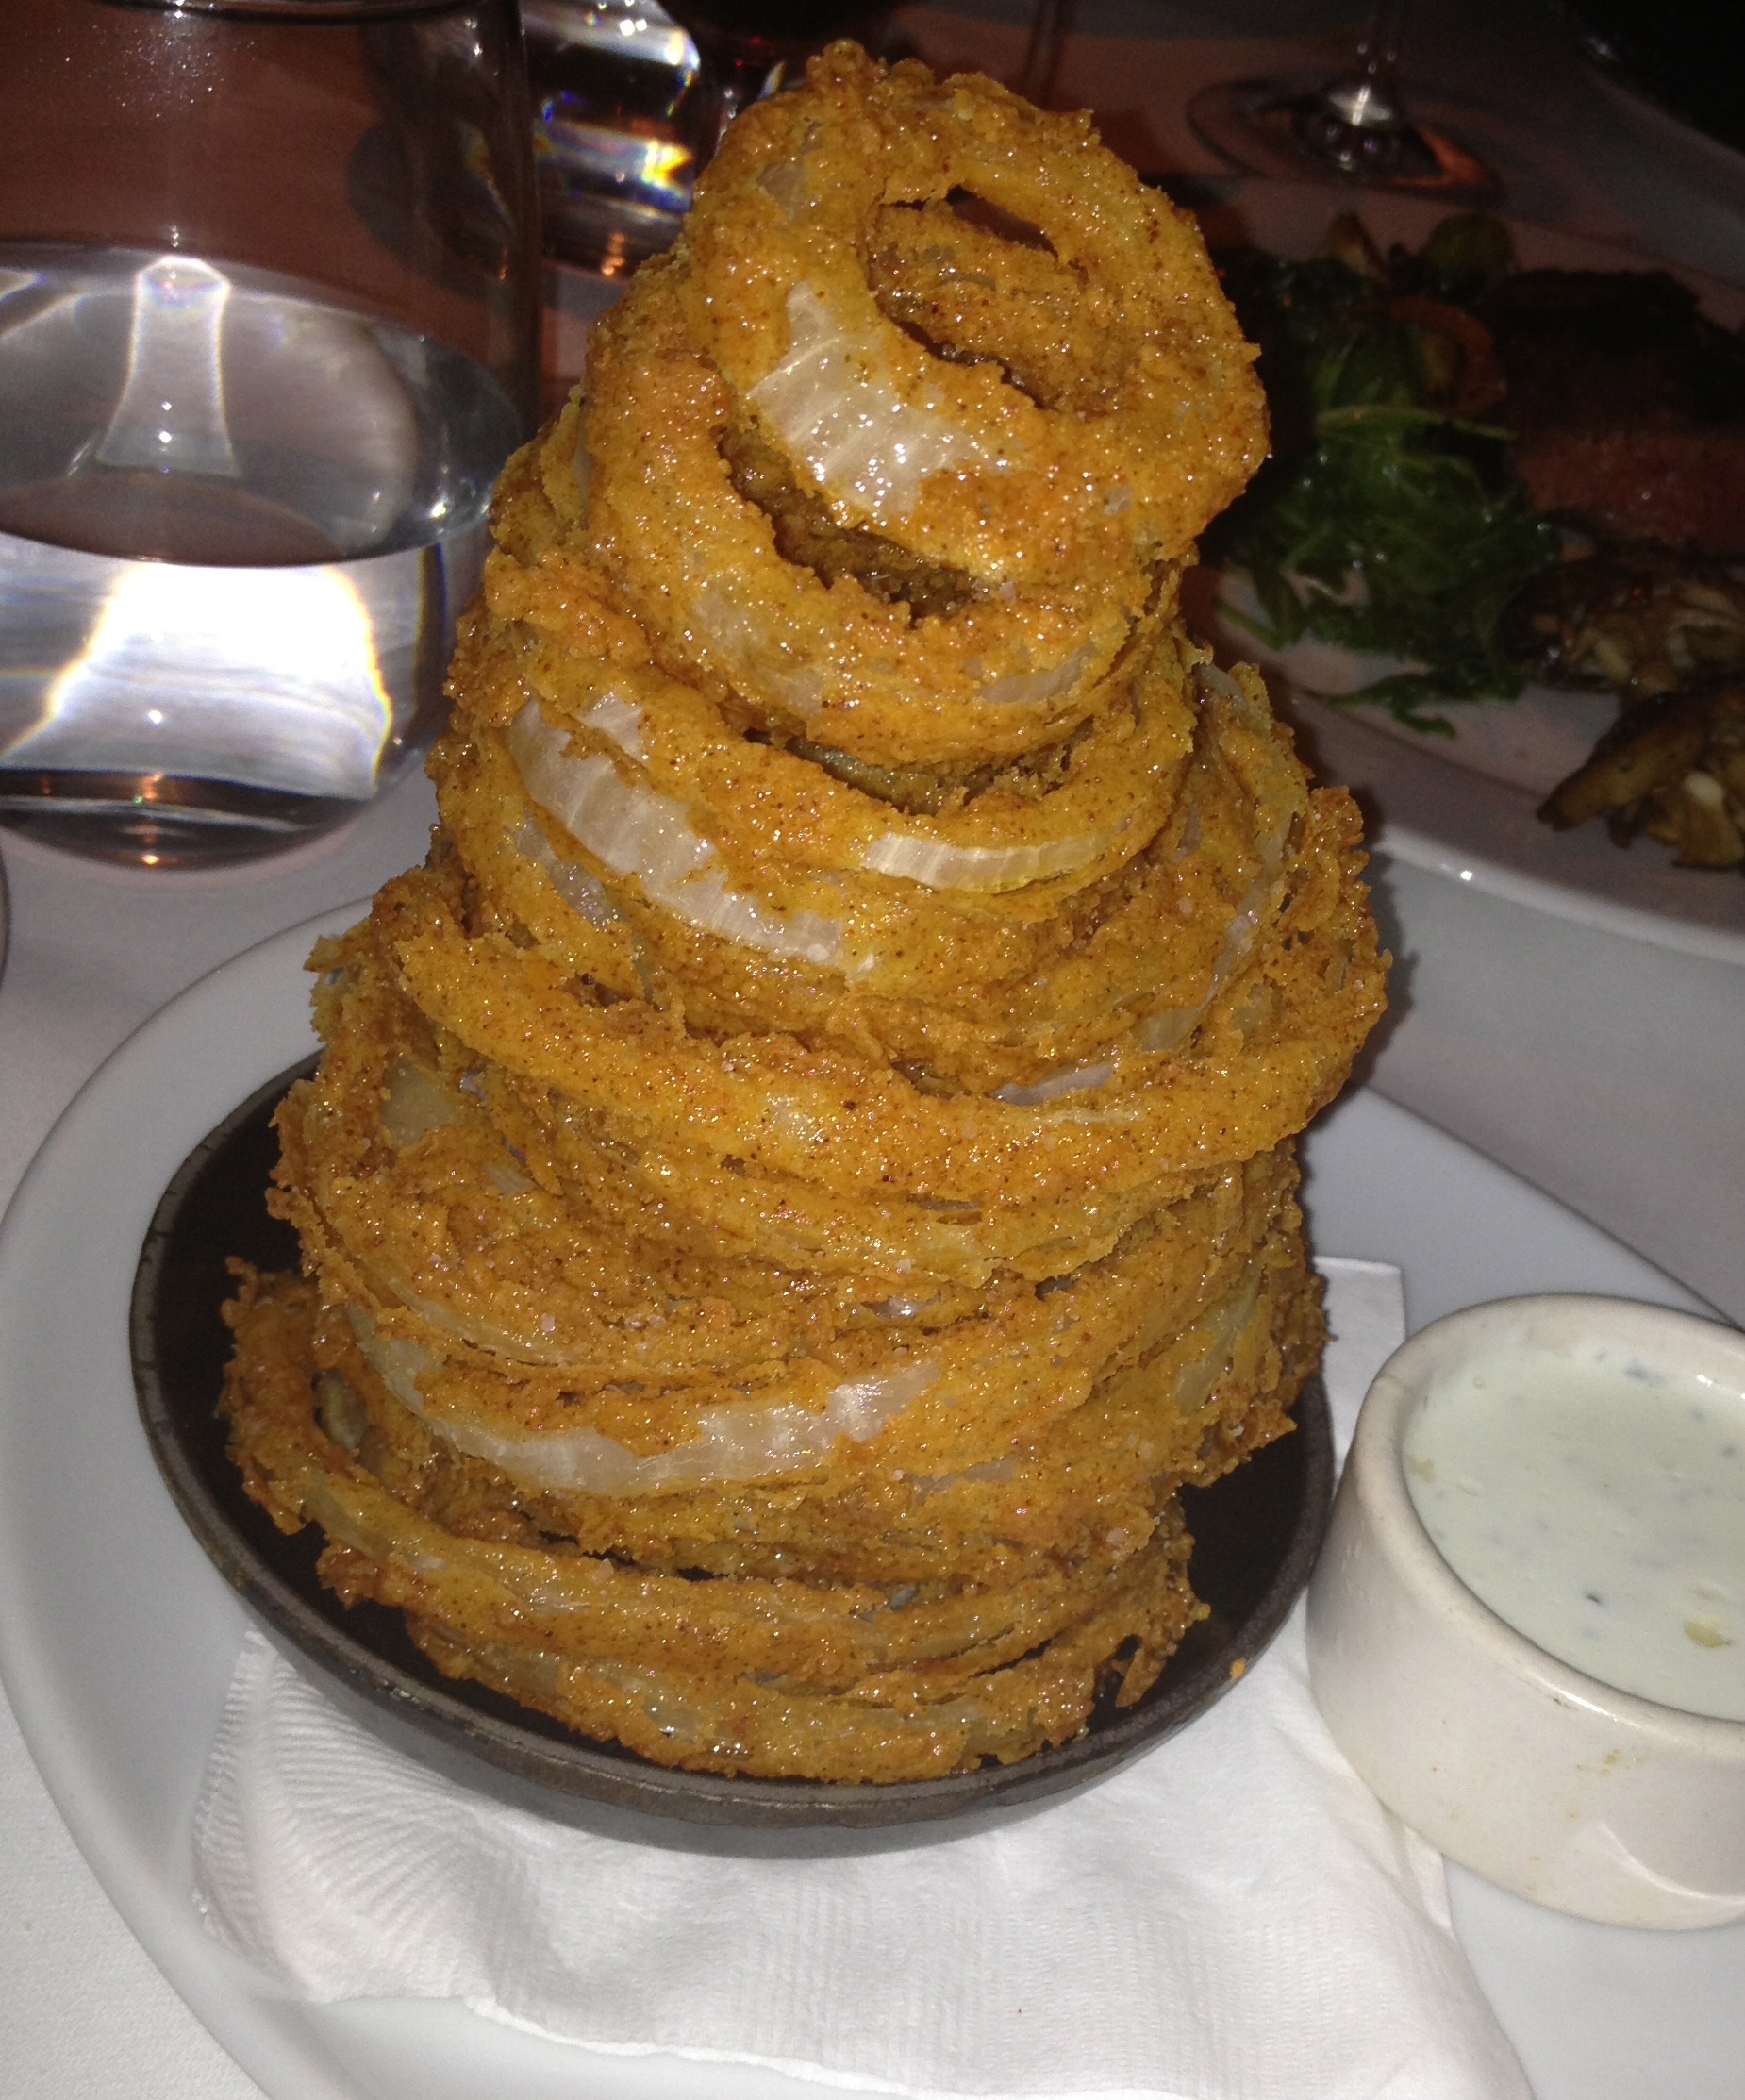 A chimney of onion rings